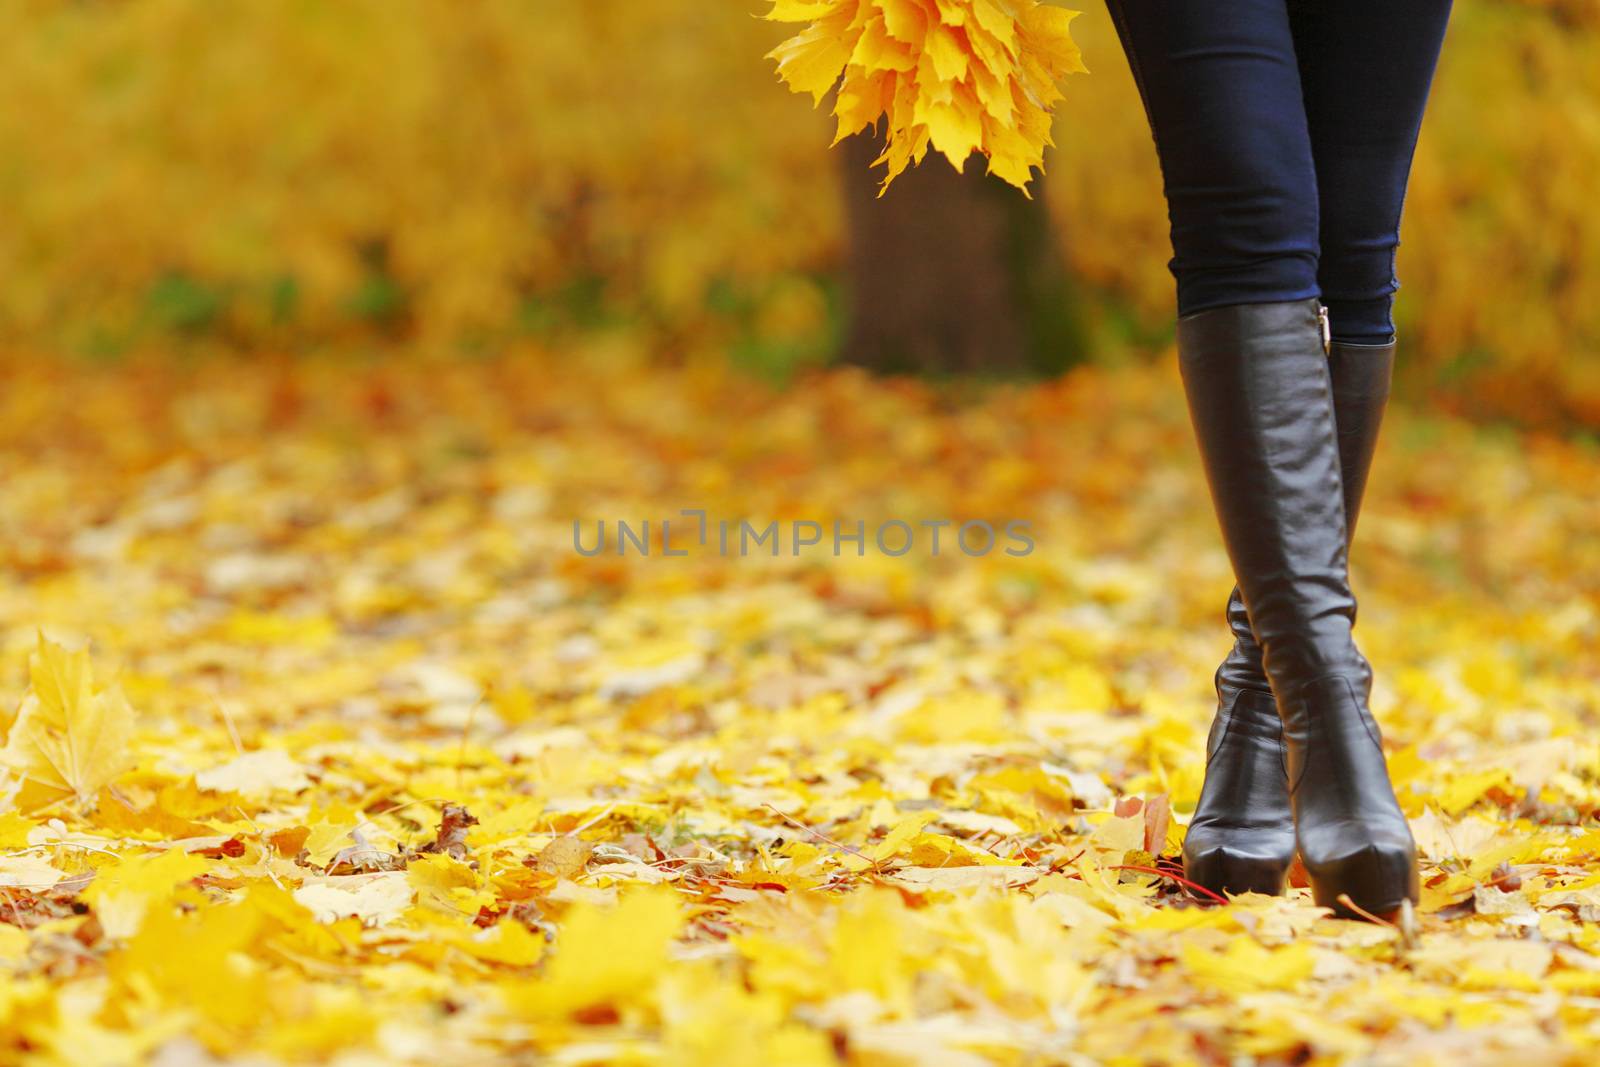 View on female legs over dry autumn leaves background